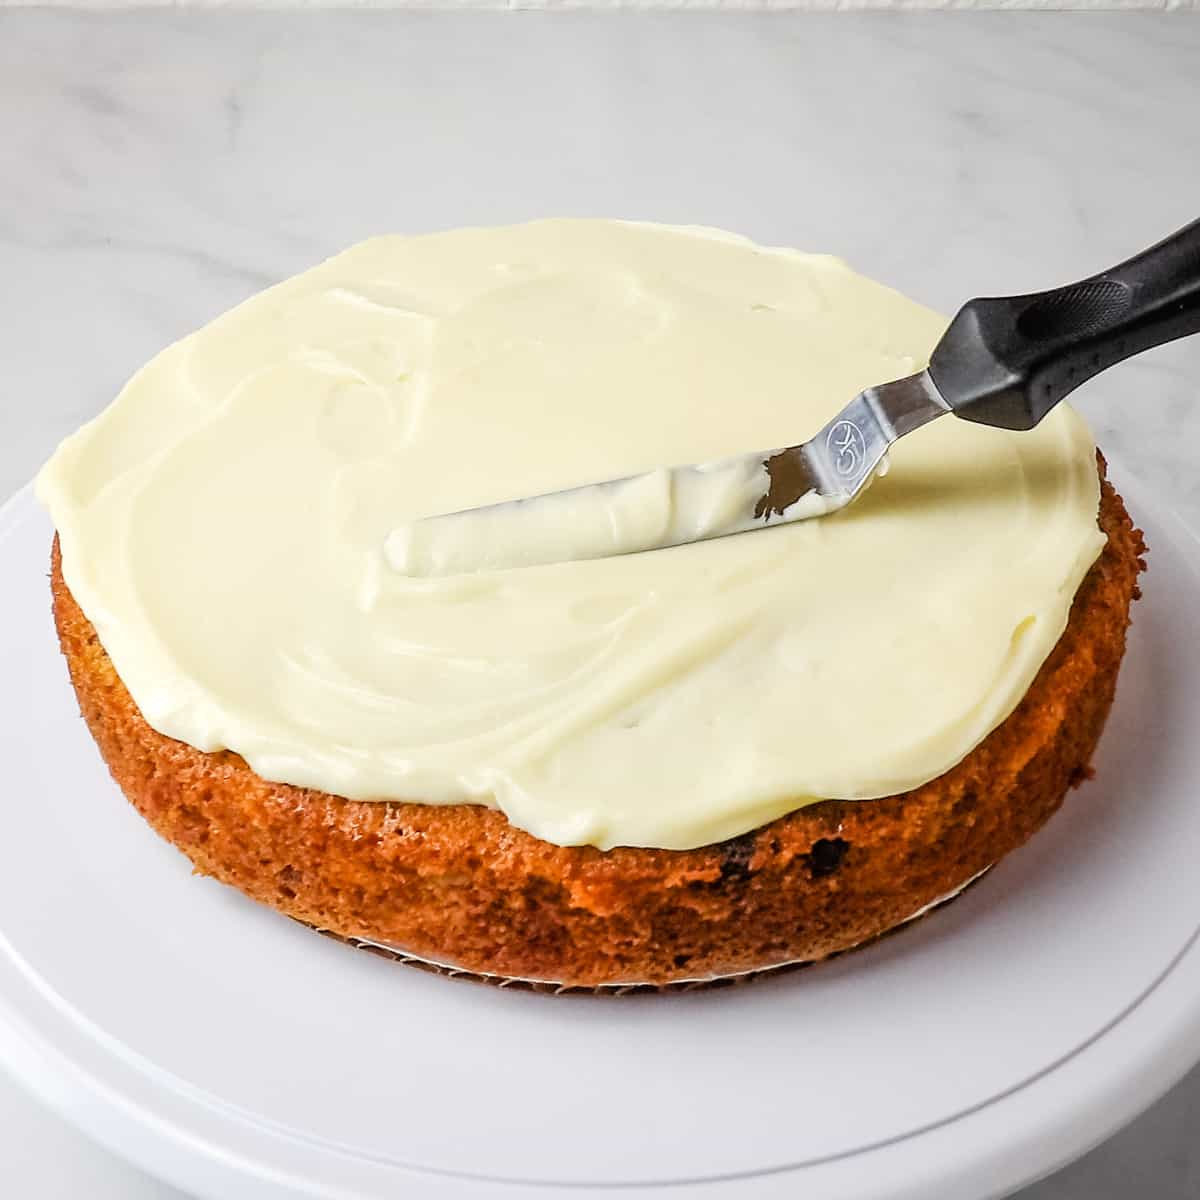 Icing homemade carrot cake with cream cheese frosting using an icing spatula.